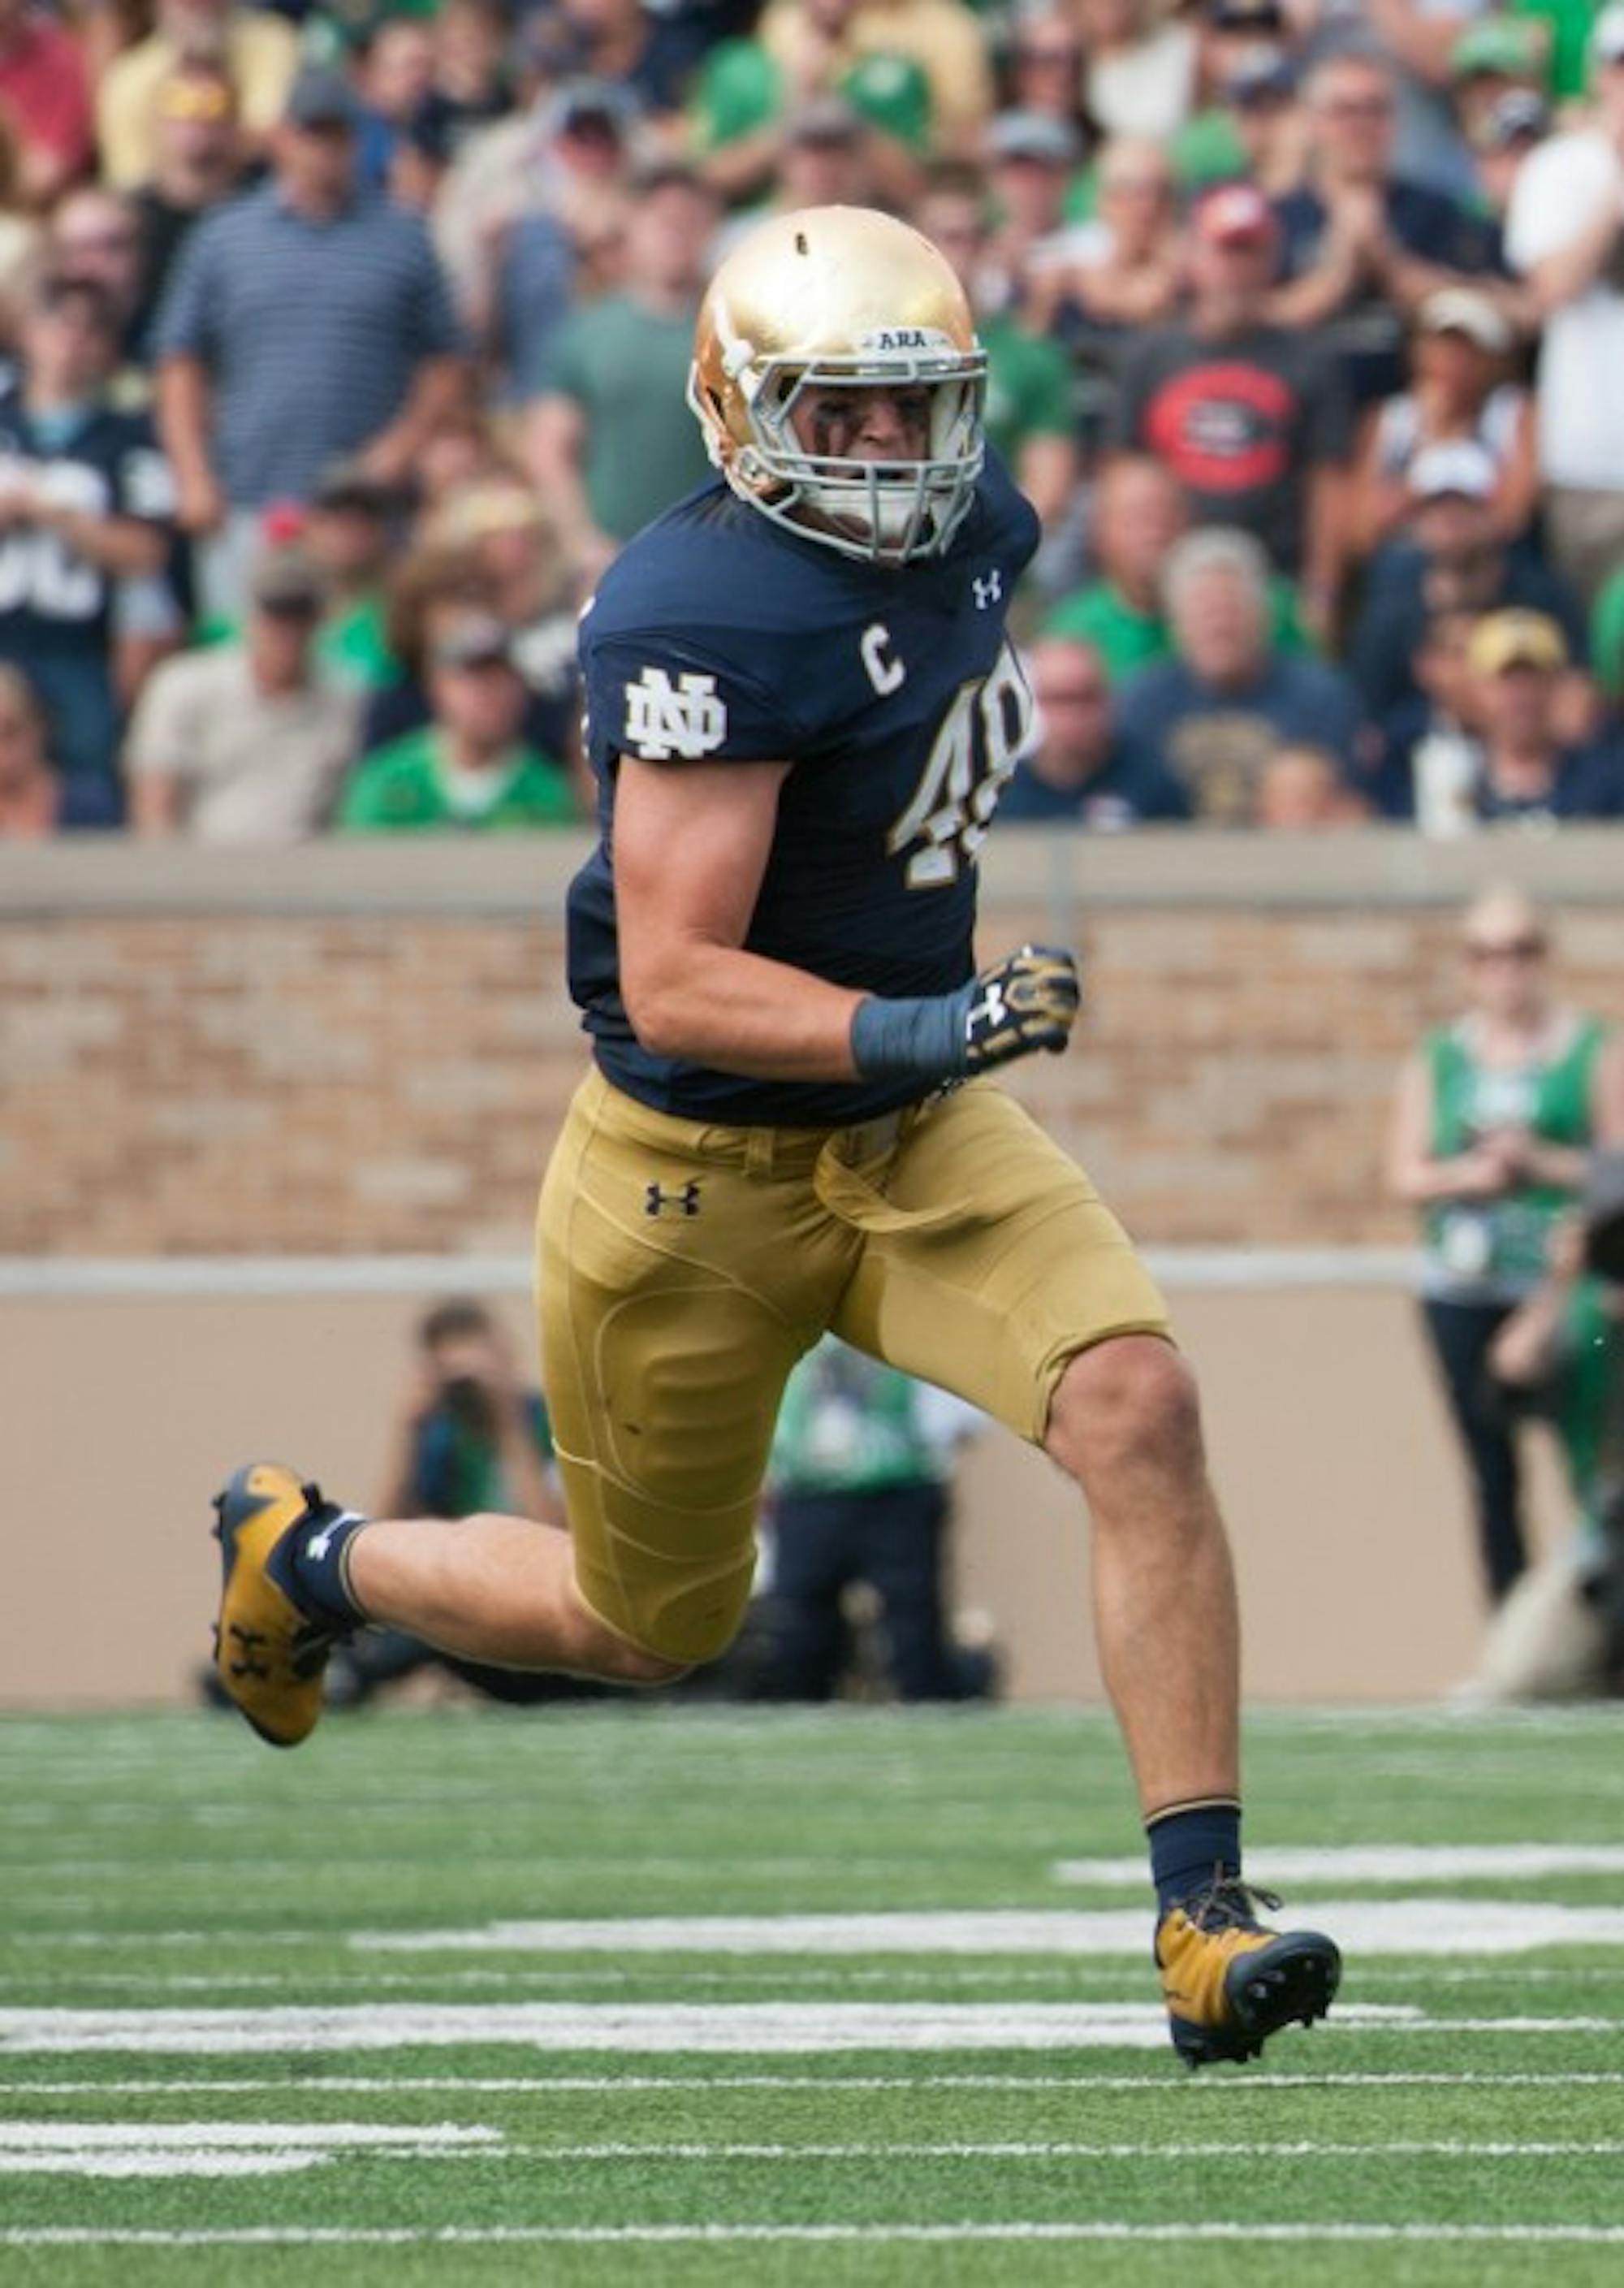 Irish senior linebacker Greer Martini runs towards the play during Notre Dame's 49-16 victory over Temple on Sept. 2 at Notre Dame Stadium. Martini recorded six tackles and a forced fumble in the contest.